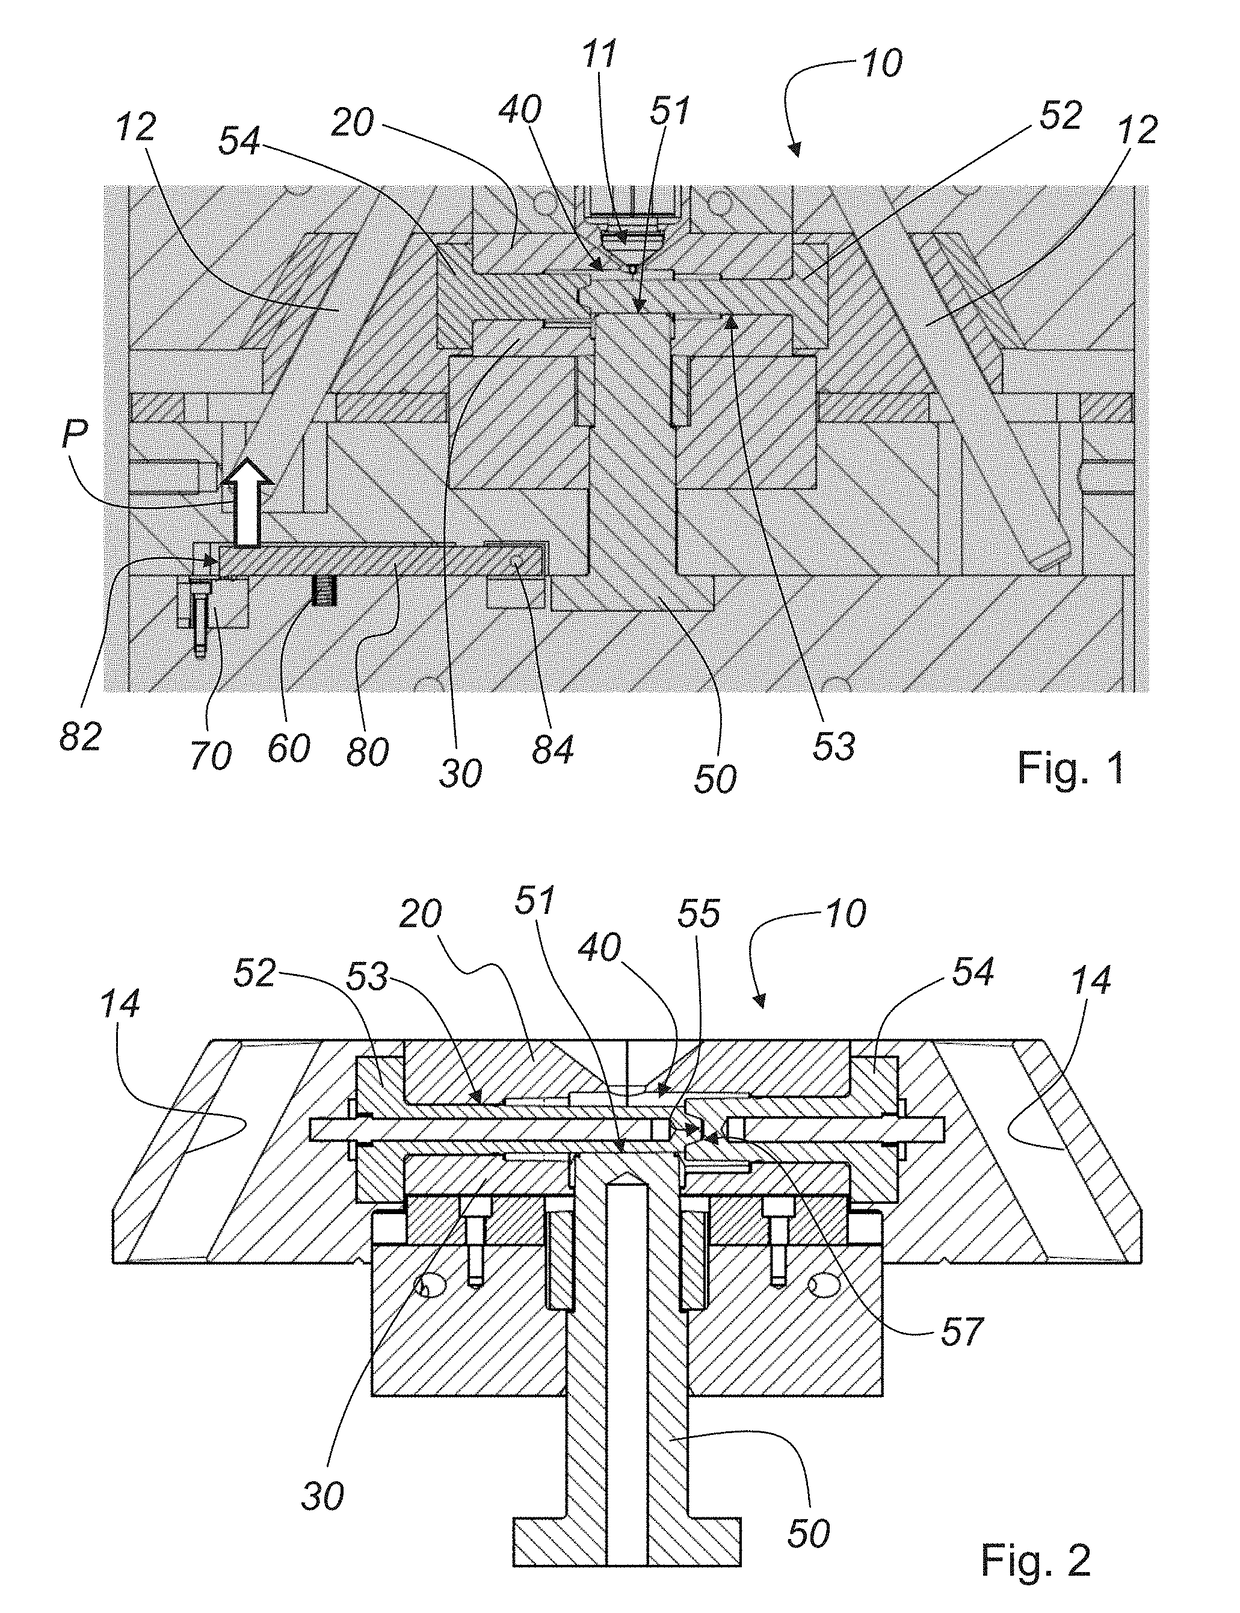 Injection molding tool and method for producing a molded part